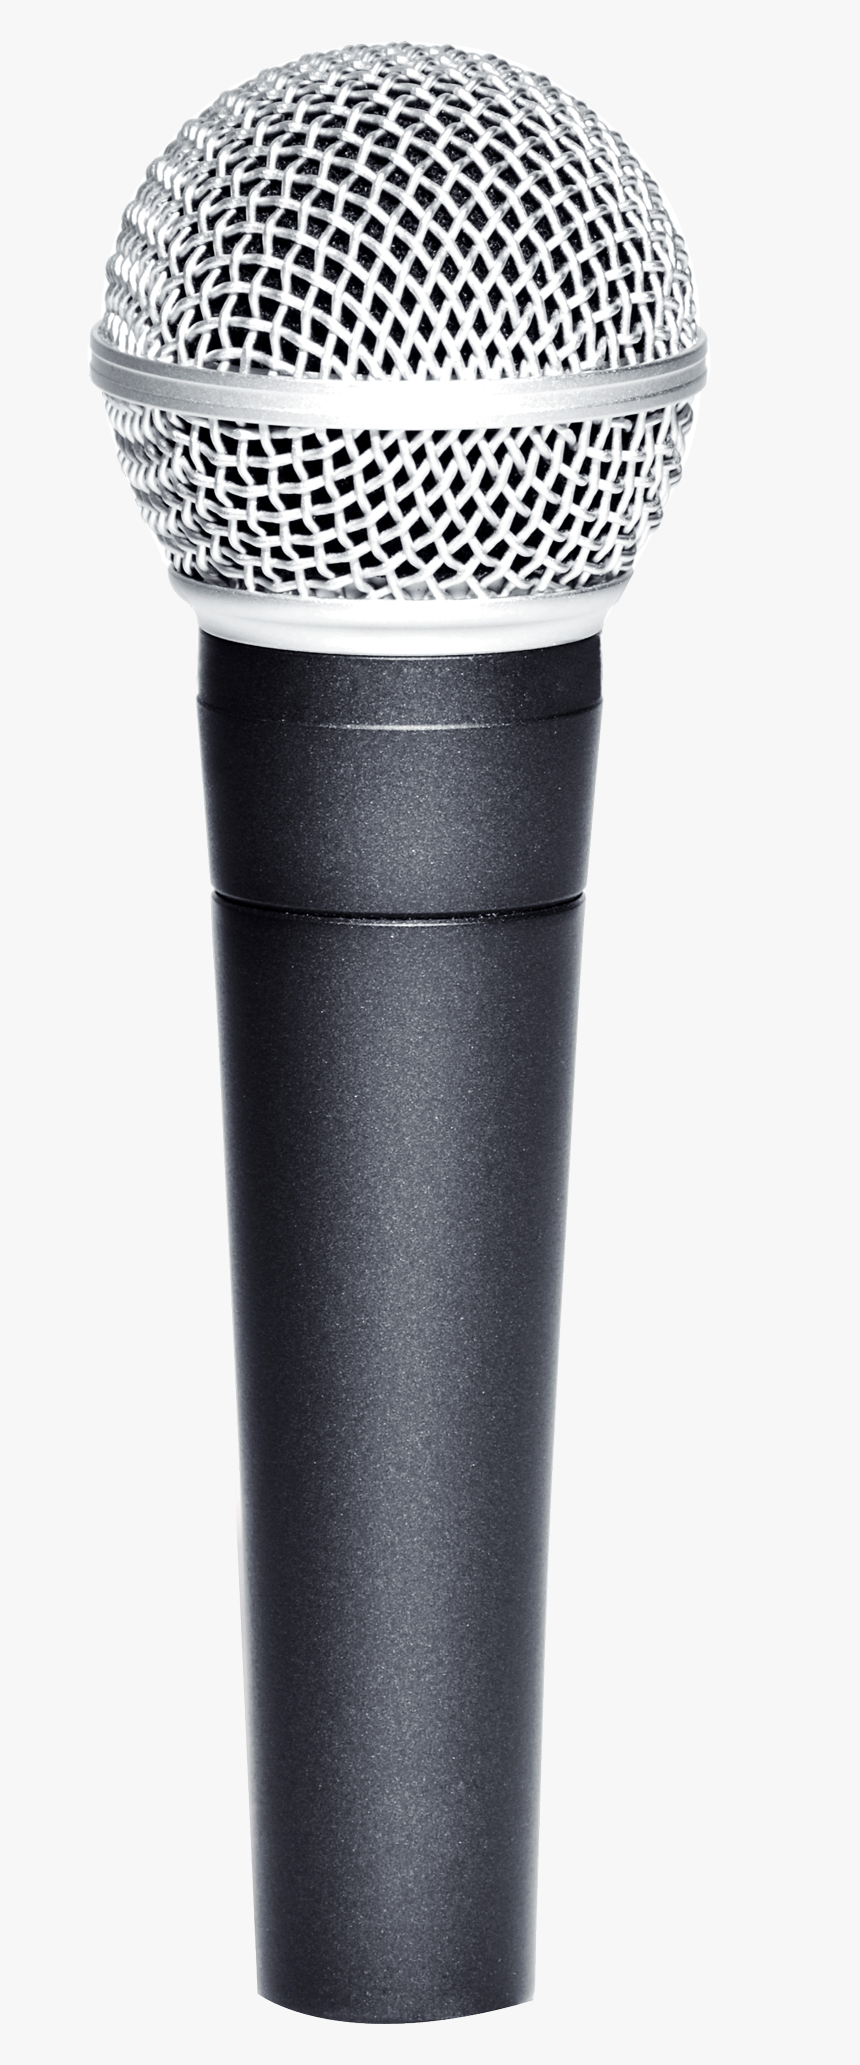 Microphone Png - Microphone - Mic Png Hd, Transparent Png, Free Download